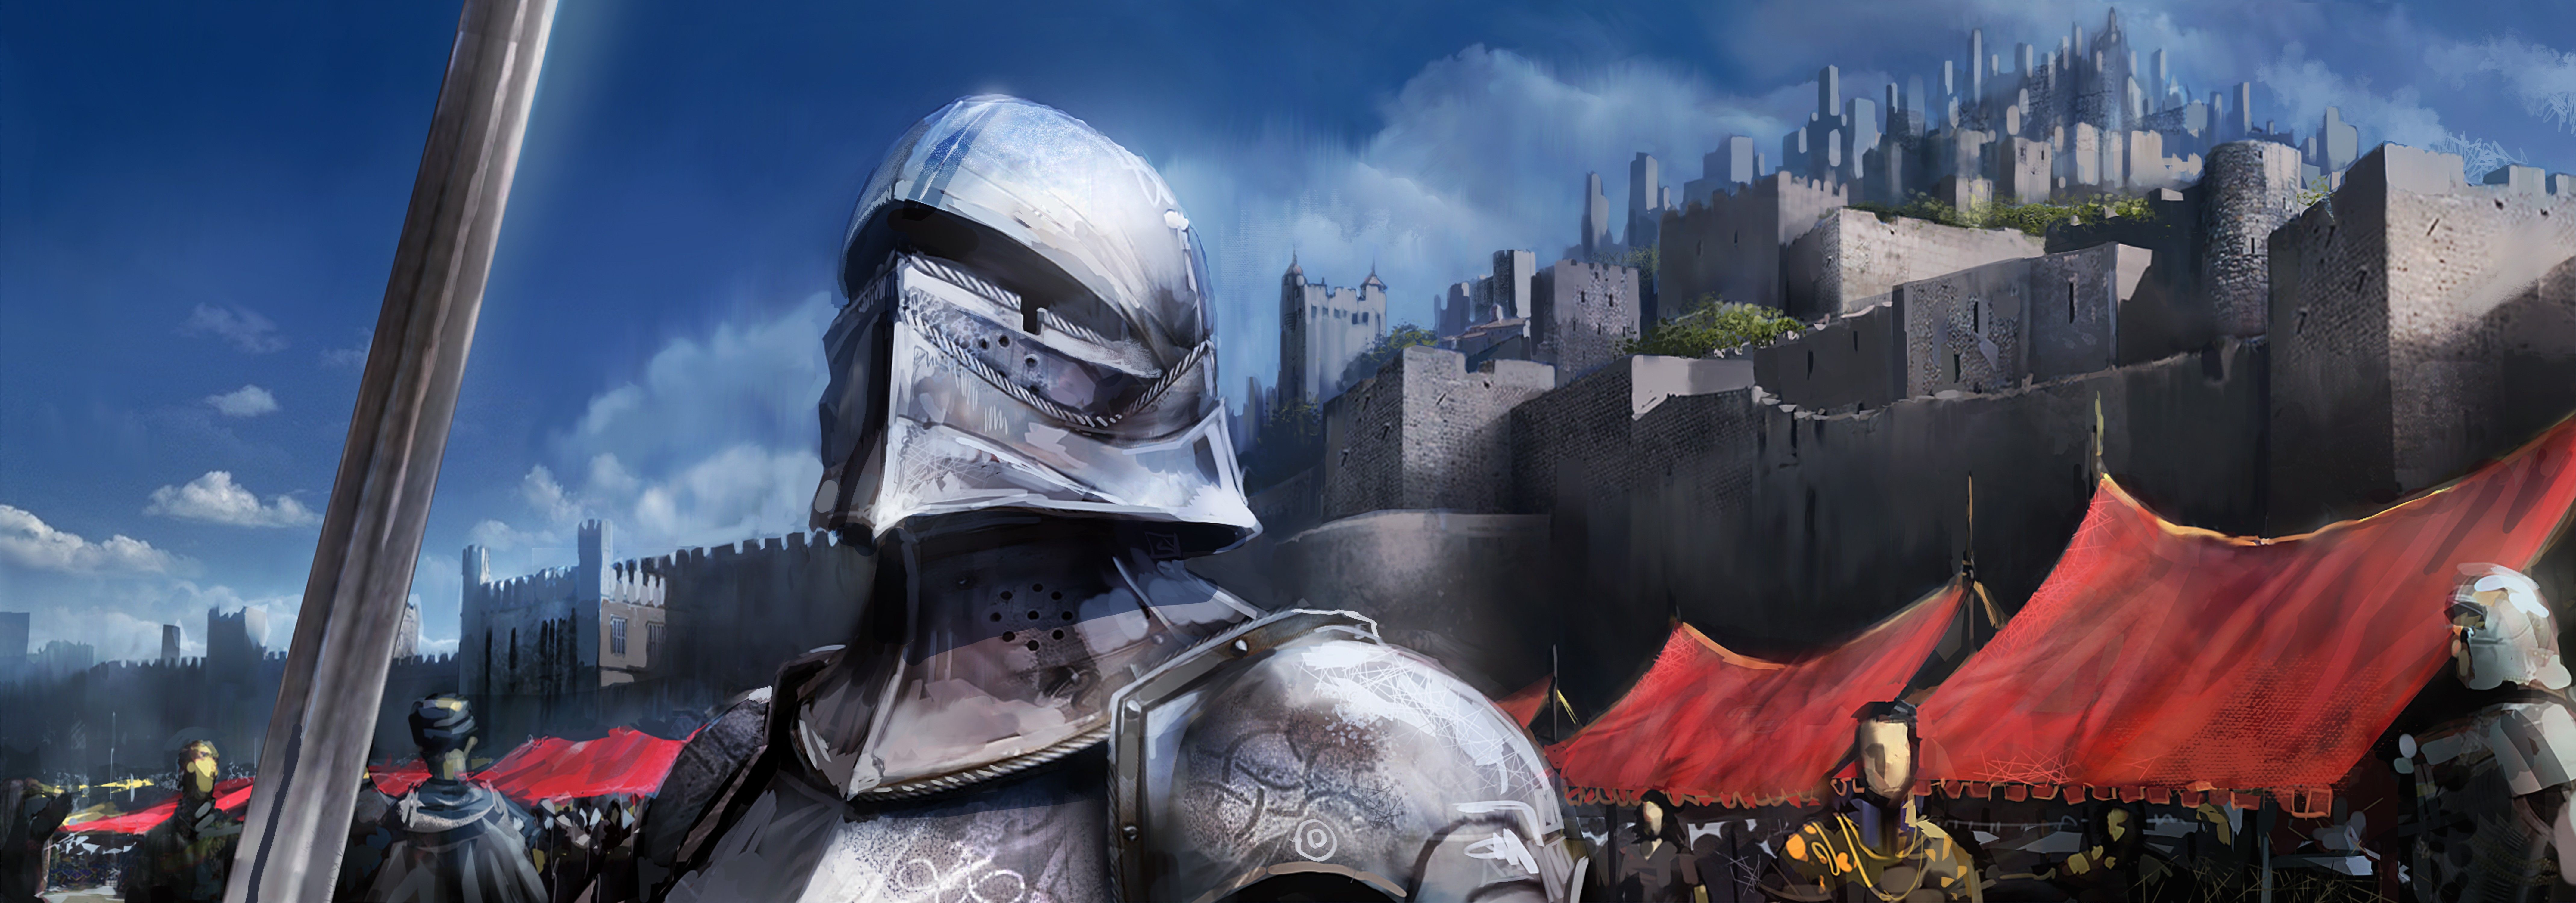 silver, #shiny, #armor, #guards, #medieval, # Megami Tensei Iv Official Art Wallpaper & Background Download